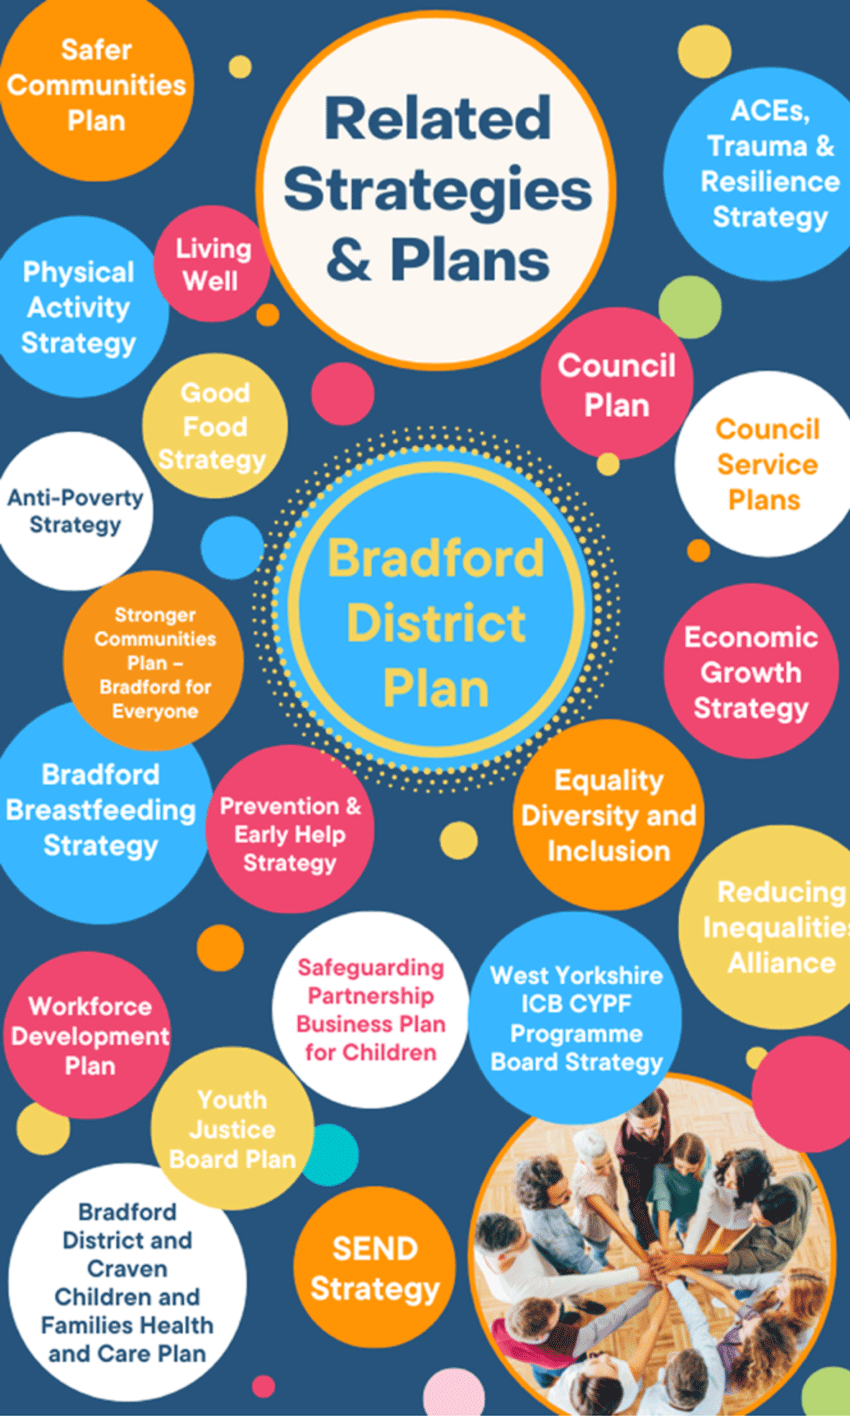 The range of other strategies and initiatives the Children and Young People strategy links to which include: Safer communities plan, Physical activity strategy, Living well, Council Plan,  Good food strategy, Council Service Plans, ACE's trauma and resilience strategy, Economic growth strategy, Reducing inequalities alliance, Equality, diversity and inclusion, Anti-poverty strategy, Stronger communities plan – Bradford for everyone, Prevention and Early Help strategy, Bradford breastfeeding strategy, Workplace development plan, Youth Justice Board plan, Bradford District and Craven children and families health and care plan, SEND strategy, Safeguarding Partnership business plan for children, West Yorkshire ICB CYBF programme Board strategy.